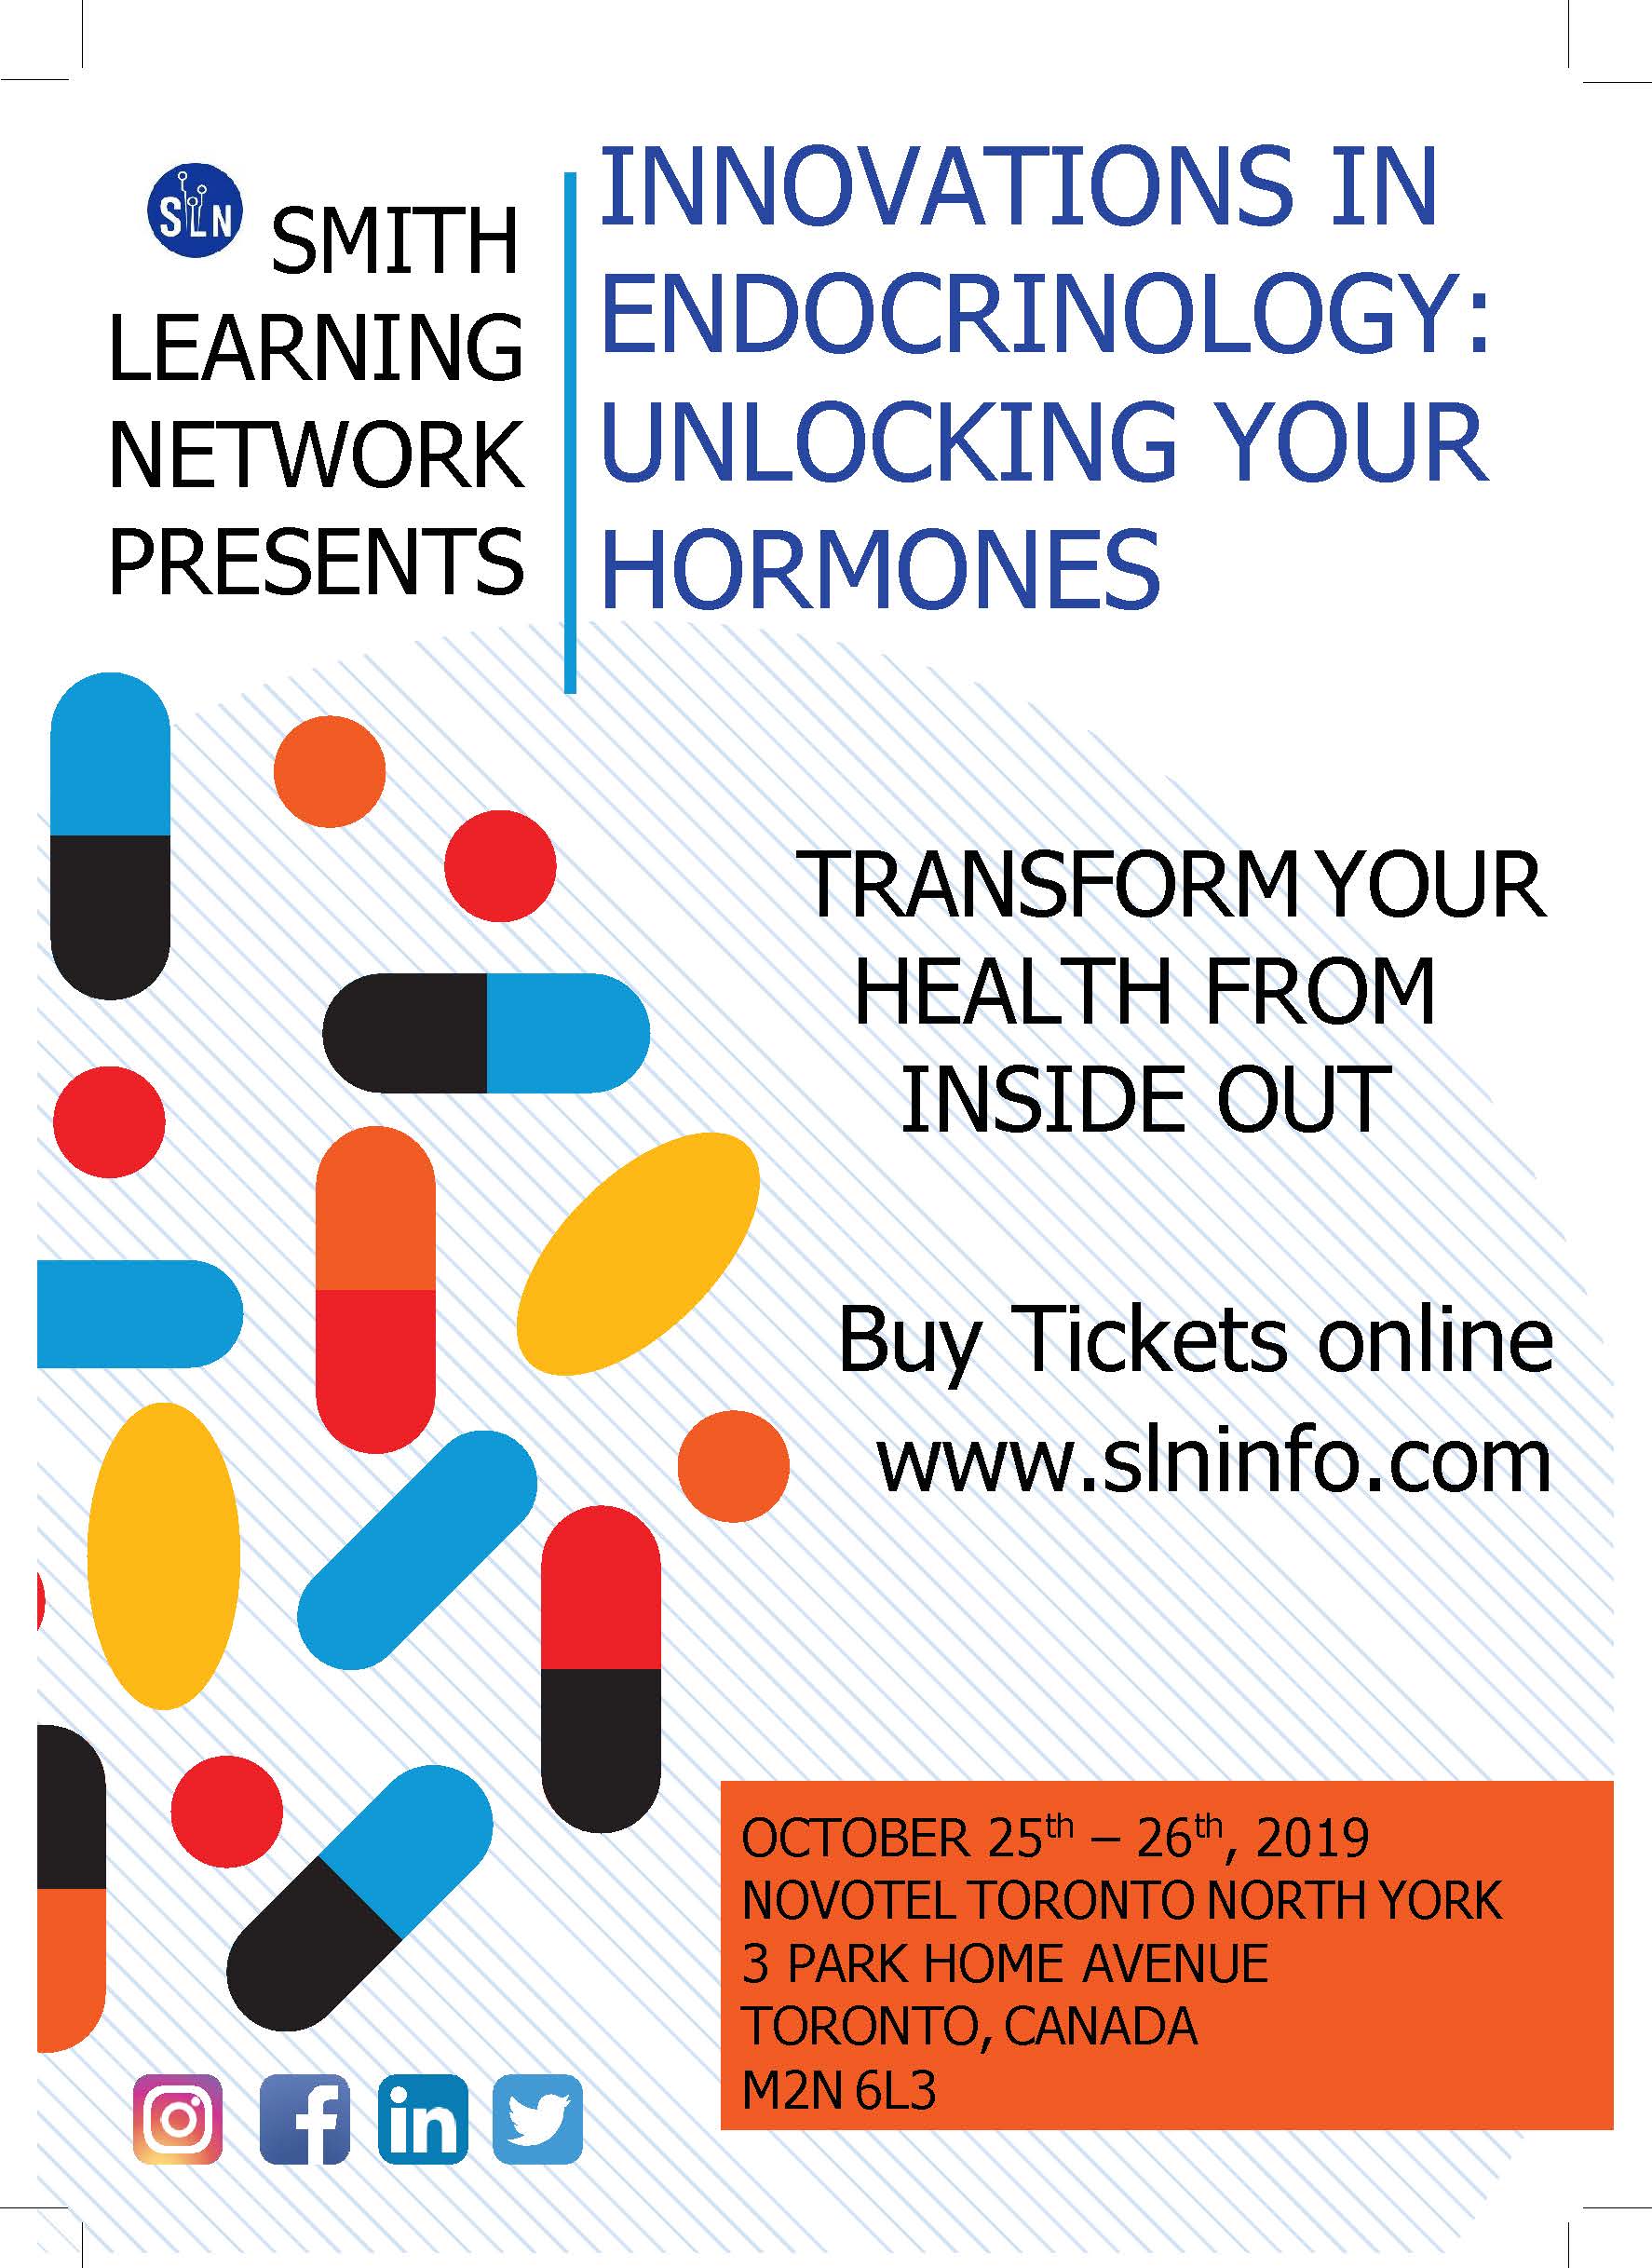 INNOVATIONS IN ENDOCRINOLOGY UNLOCKING YOUR HORMONES Smith Learning